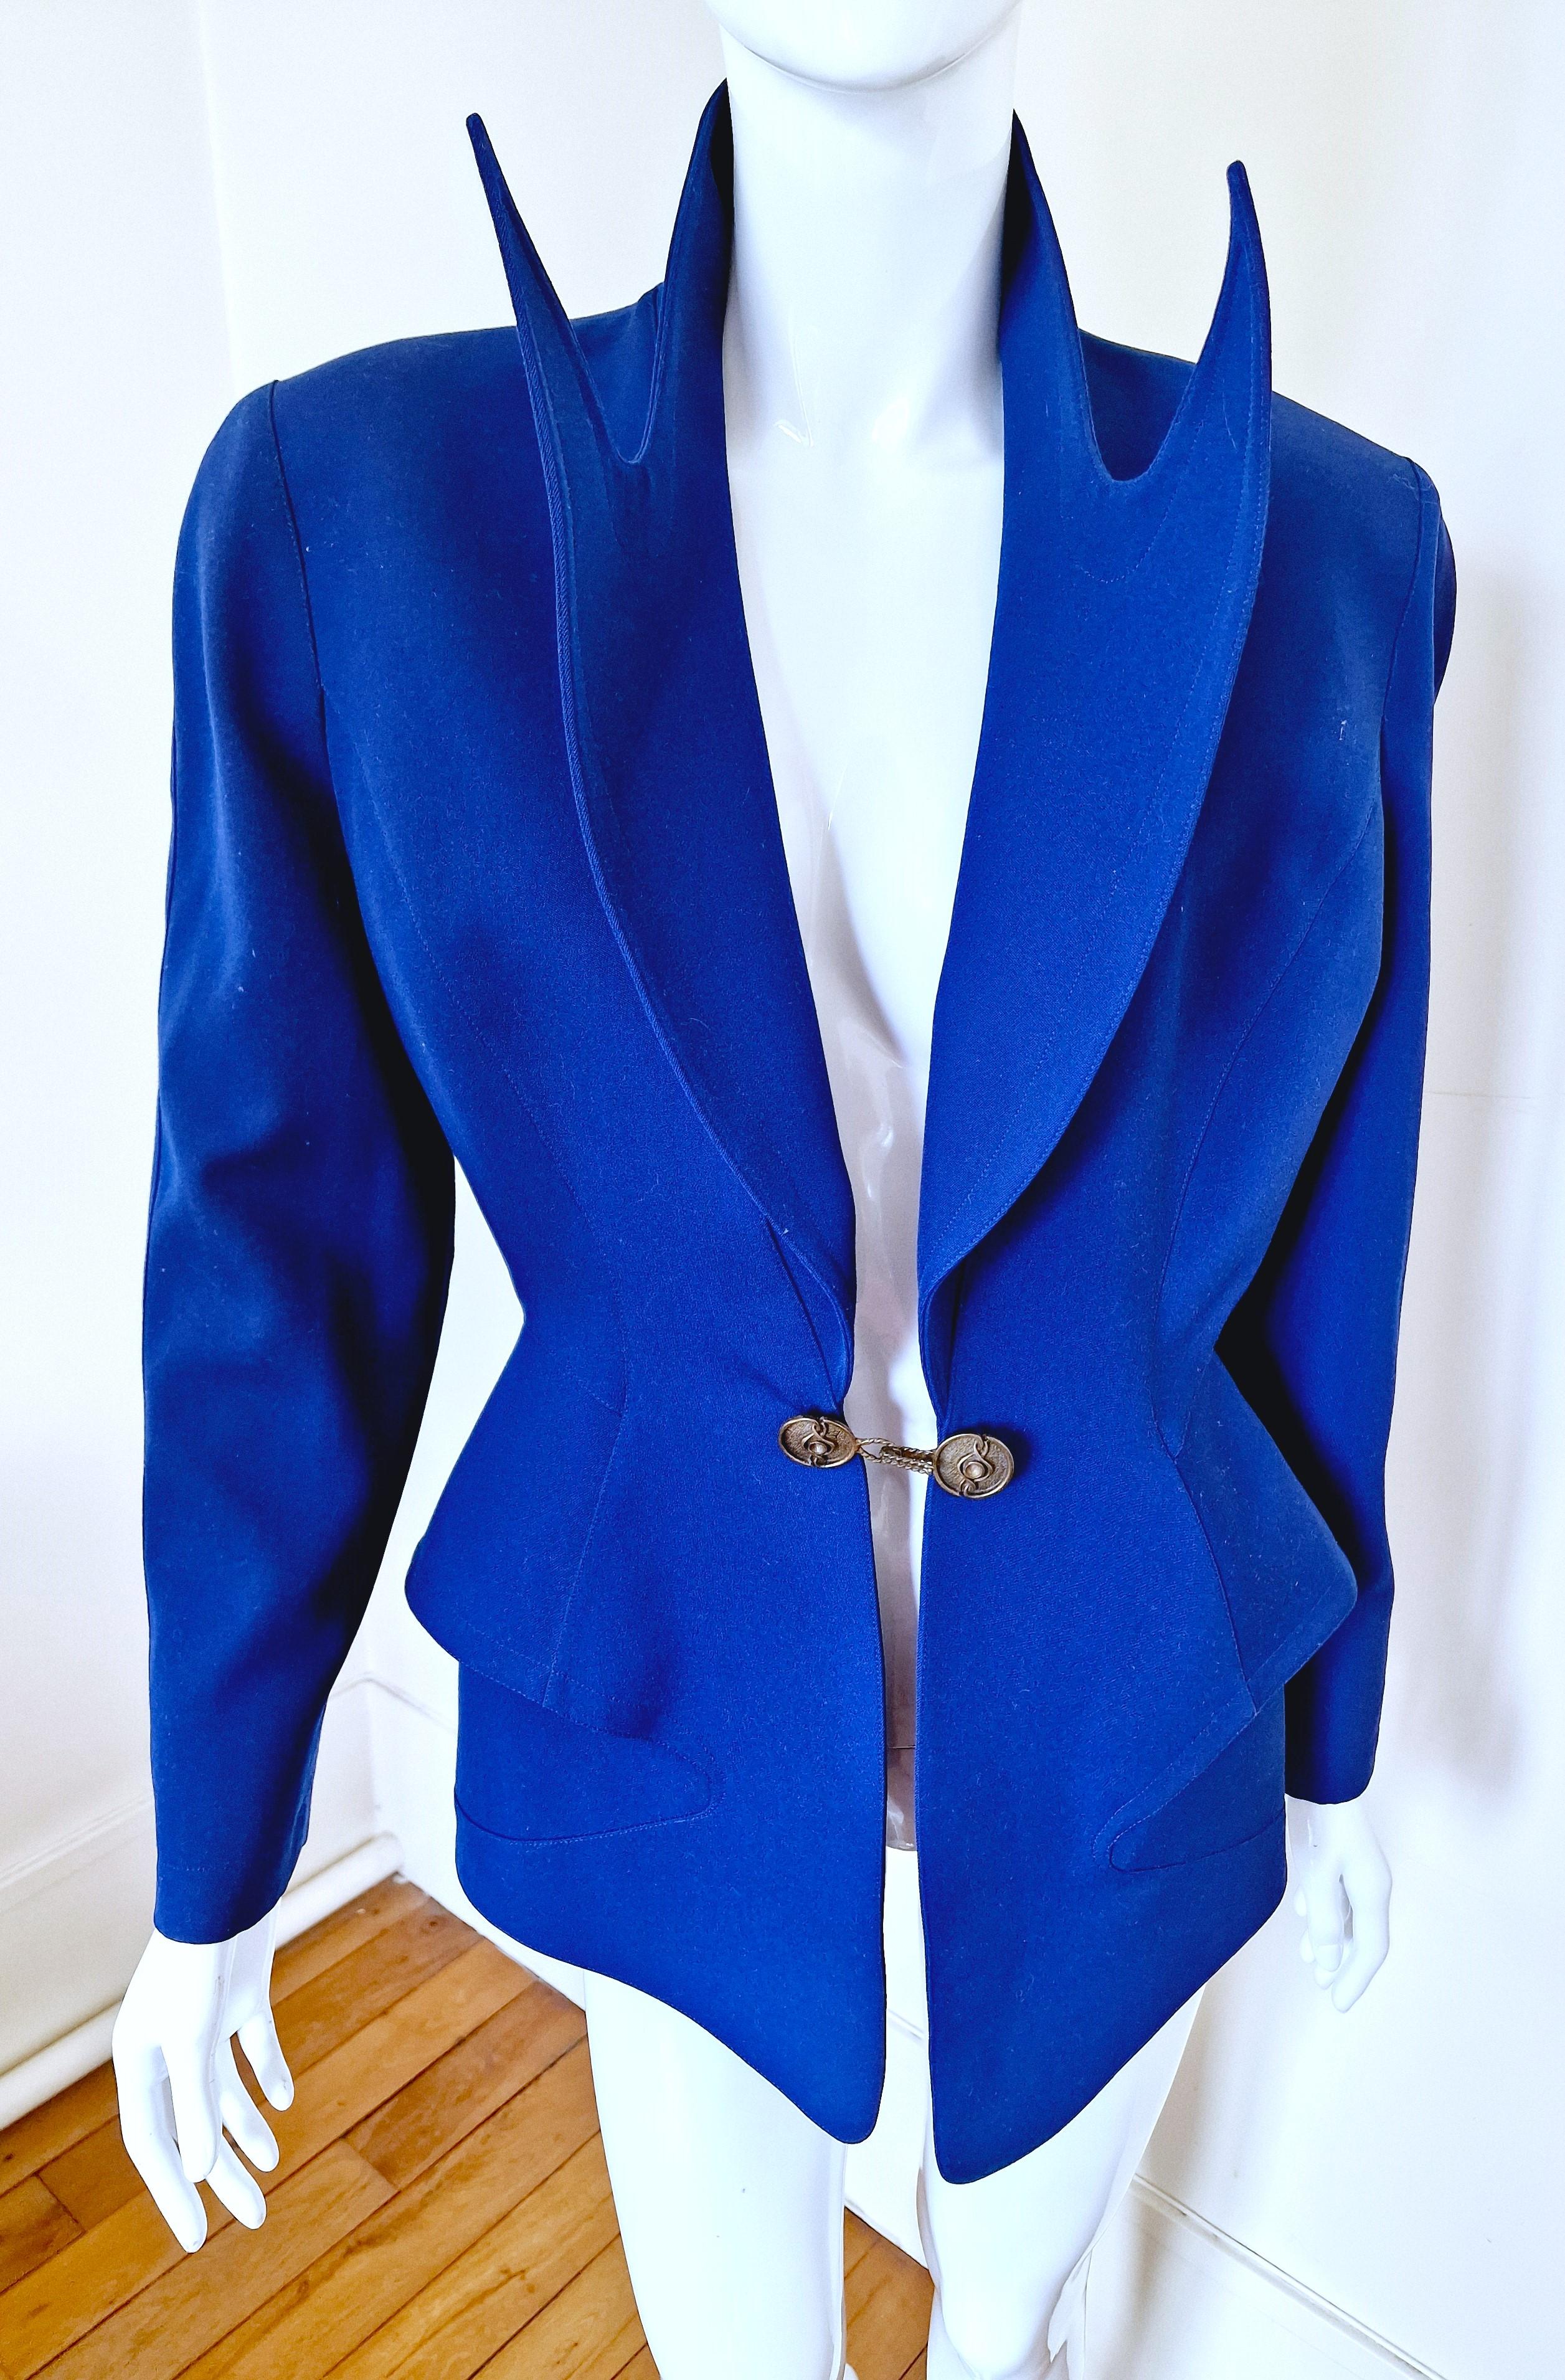 Thierry Mugler Vampire Blue Couture Chain Metal Vintage Large Blazer Jacket For Sale 3